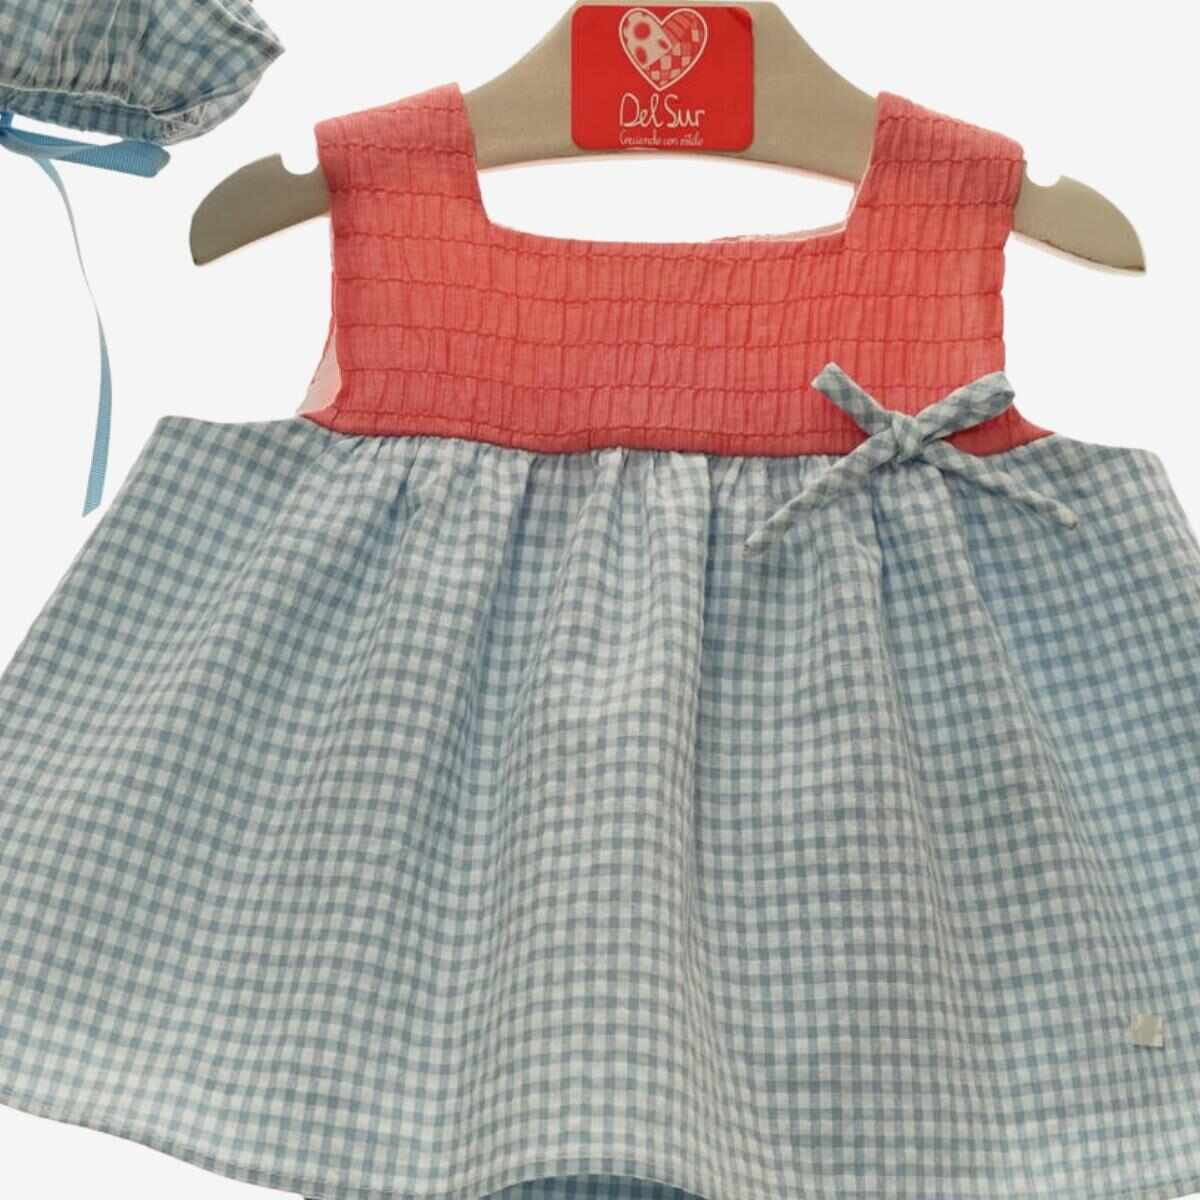 CHECKERED DRESS WITH MATCHING BONNET AND BLOOMER DELSUR - 1